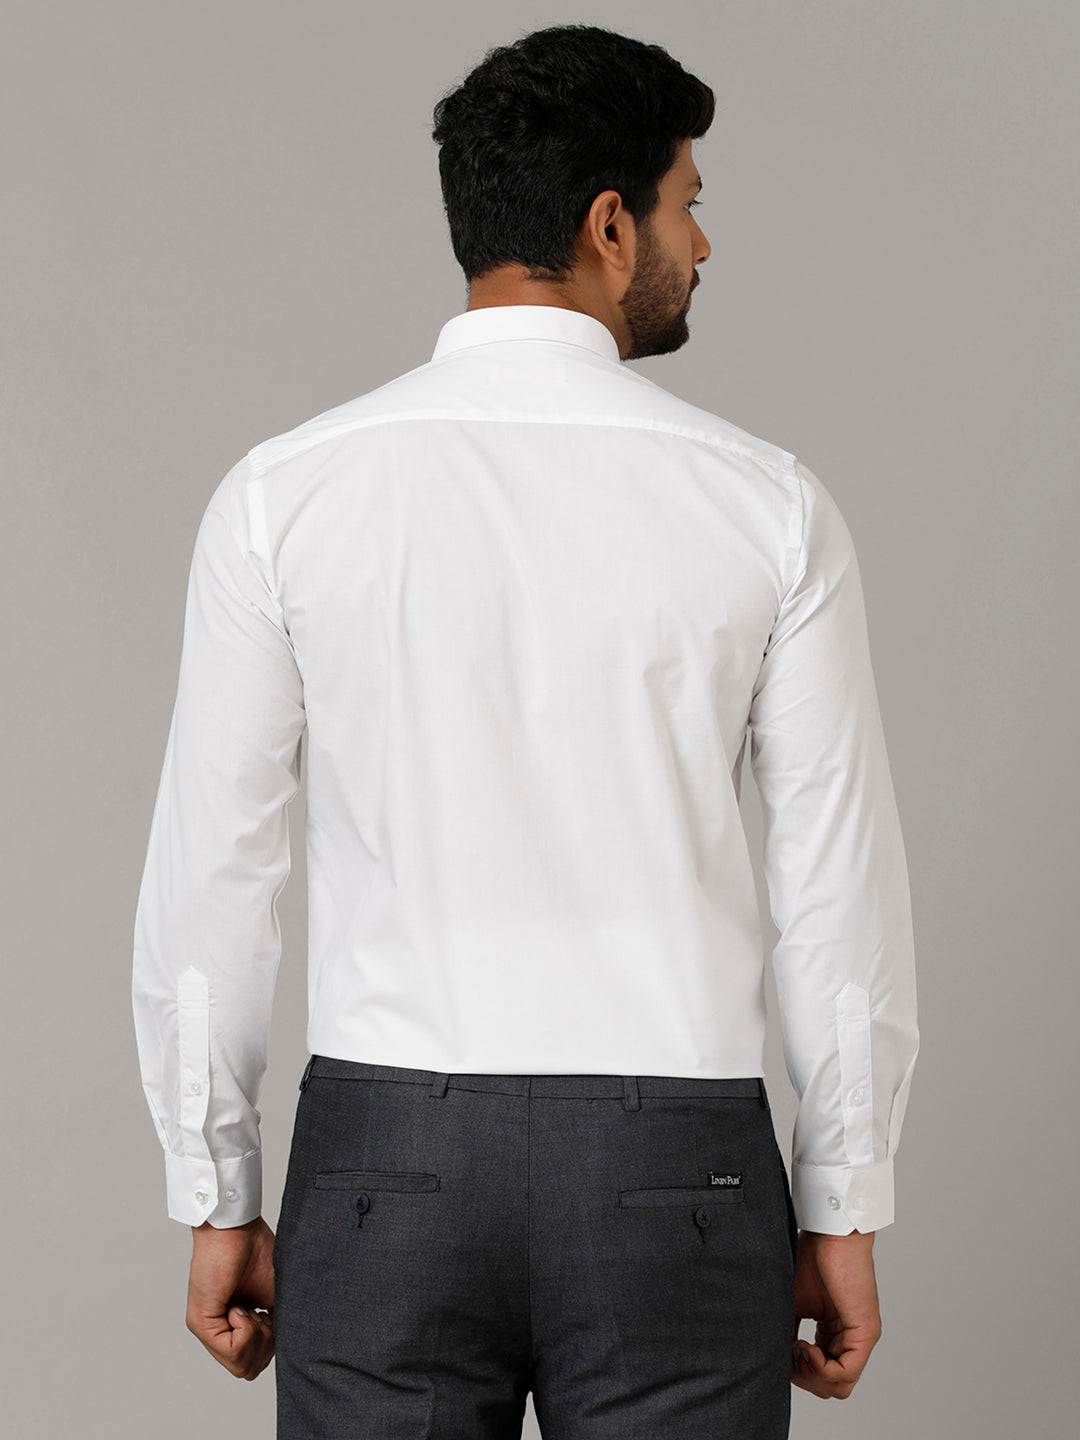 Mens Cotton Smart Fit White Shirt Full Sleeves Without Pocket -Back view